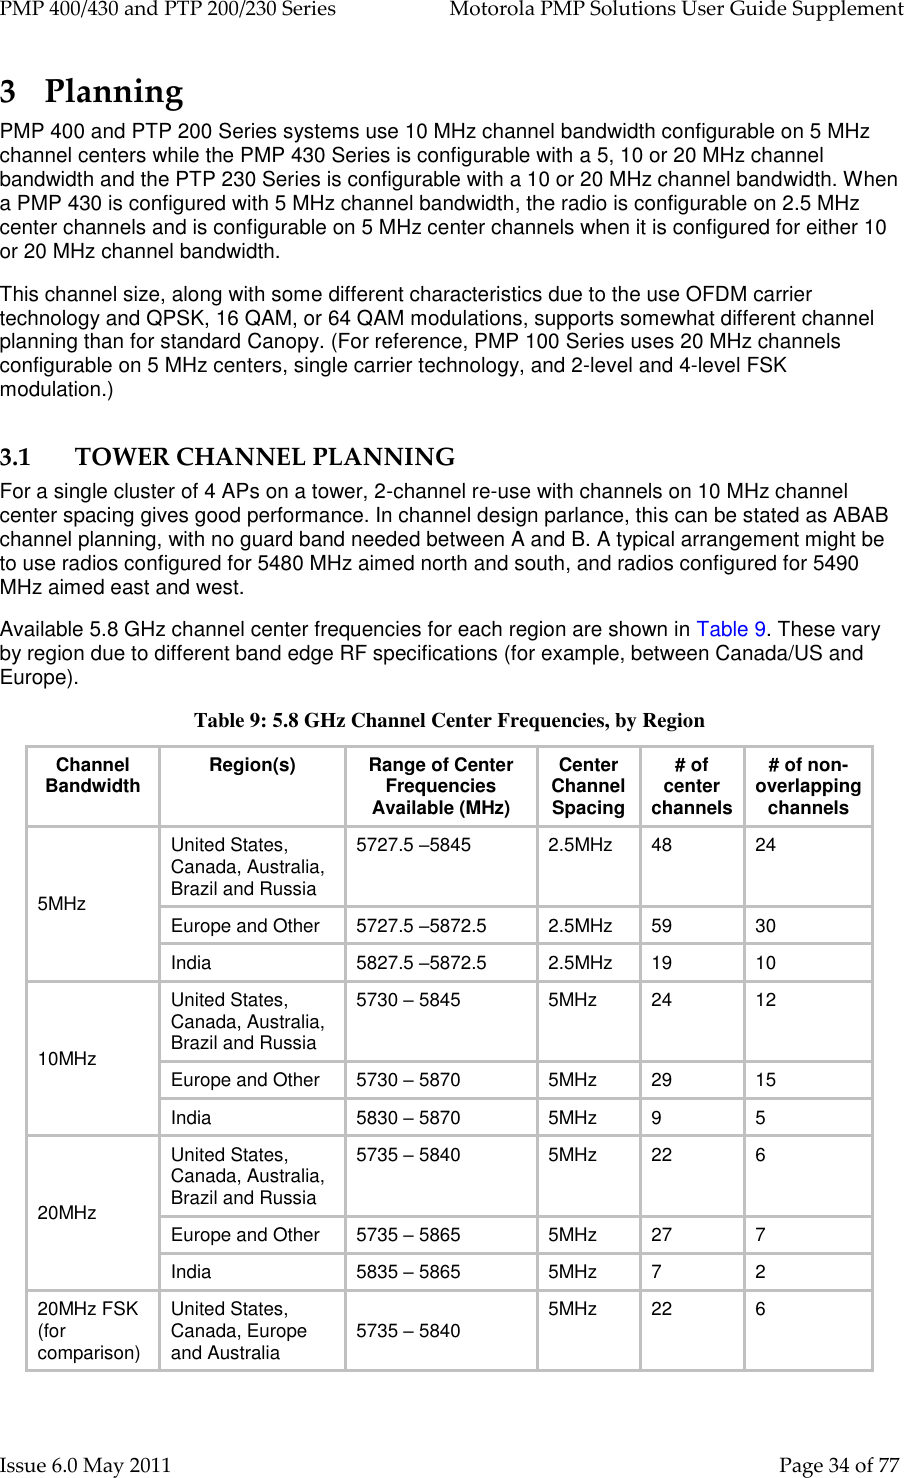 PMP 400/430 and PTP 200/230 Series   Motorola PMP Solutions User Guide Supplement Issue 6.0 May 2011    Page 34 of 77 3 Planning PMP 400 and PTP 200 Series systems use 10 MHz channel bandwidth configurable on 5 MHz channel centers while the PMP 430 Series is configurable with a 5, 10 or 20 MHz channel bandwidth and the PTP 230 Series is configurable with a 10 or 20 MHz channel bandwidth. When a PMP 430 is configured with 5 MHz channel bandwidth, the radio is configurable on 2.5 MHz center channels and is configurable on 5 MHz center channels when it is configured for either 10 or 20 MHz channel bandwidth. This channel size, along with some different characteristics due to the use OFDM carrier technology and QPSK, 16 QAM, or 64 QAM modulations, supports somewhat different channel planning than for standard Canopy. (For reference, PMP 100 Series uses 20 MHz channels configurable on 5 MHz centers, single carrier technology, and 2-level and 4-level FSK modulation.) 3.1 TOWER CHANNEL PLANNING For a single cluster of 4 APs on a tower, 2-channel re-use with channels on 10 MHz channel center spacing gives good performance. In channel design parlance, this can be stated as ABAB channel planning, with no guard band needed between A and B. A typical arrangement might be to use radios configured for 5480 MHz aimed north and south, and radios configured for 5490 MHz aimed east and west. Available 5.8 GHz channel center frequencies for each region are shown in Table 9. These vary by region due to different band edge RF specifications (for example, between Canada/US and Europe). Table 9: 5.8 GHz Channel Center Frequencies, by Region Channel Bandwidth Region(s) Range of Center Frequencies Available (MHz) Center Channel Spacing # of center channels # of non-overlapping channels 5MHz United States, Canada, Australia, Brazil and Russia 5727.5 –5845 2.5MHz 48 24 Europe and Other 5727.5 –5872.5 2.5MHz 59 30 India 5827.5 –5872.5 2.5MHz 19 10 10MHz United States, Canada, Australia, Brazil and Russia 5730 – 5845 5MHz 24 12 Europe and Other 5730 – 5870 5MHz 29 15 India 5830 – 5870 5MHz 9 5 20MHz United States, Canada, Australia, Brazil and Russia 5735 – 5840 5MHz 22 6 Europe and Other 5735 – 5865 5MHz 27 7 India 5835 – 5865 5MHz 7 2 20MHz FSK (for comparison) United States, Canada, Europe and Australia 5735 – 5840 5MHz 22 6  